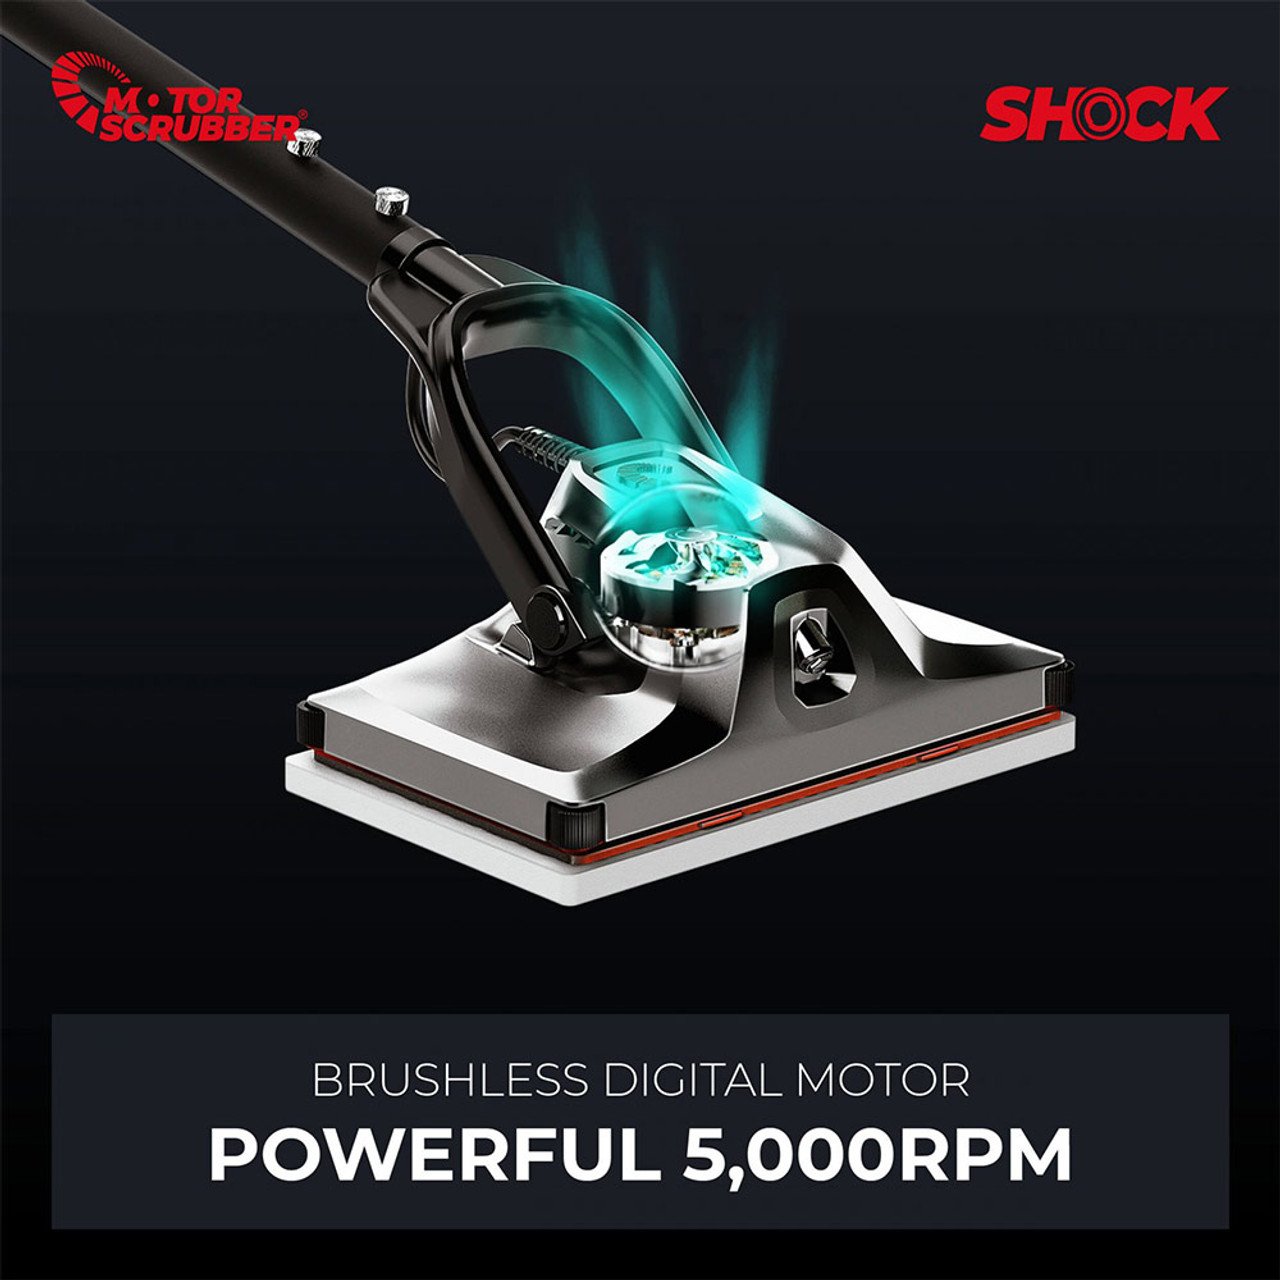 https://cdn11.bigcommerce.com/s-8mji1/images/stencil/1280x1280/products/7918/26451/MSSHOCK_brushless_motor__33722.1695414528.jpg?c=2